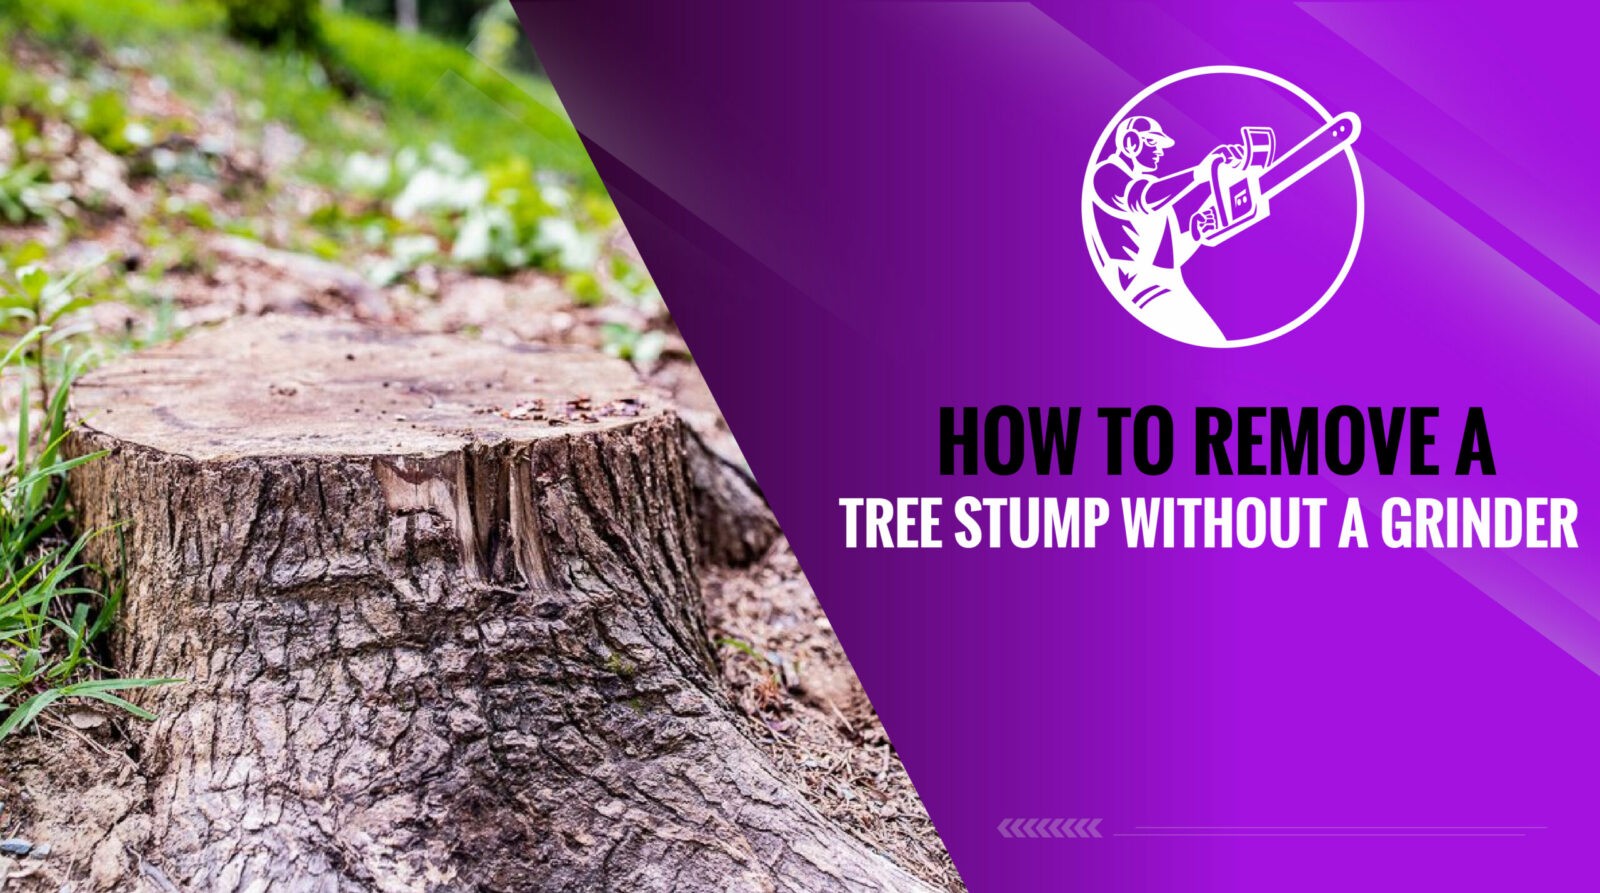 How to Remove a Tree Stump Without A Grinder? – 2022 Guide